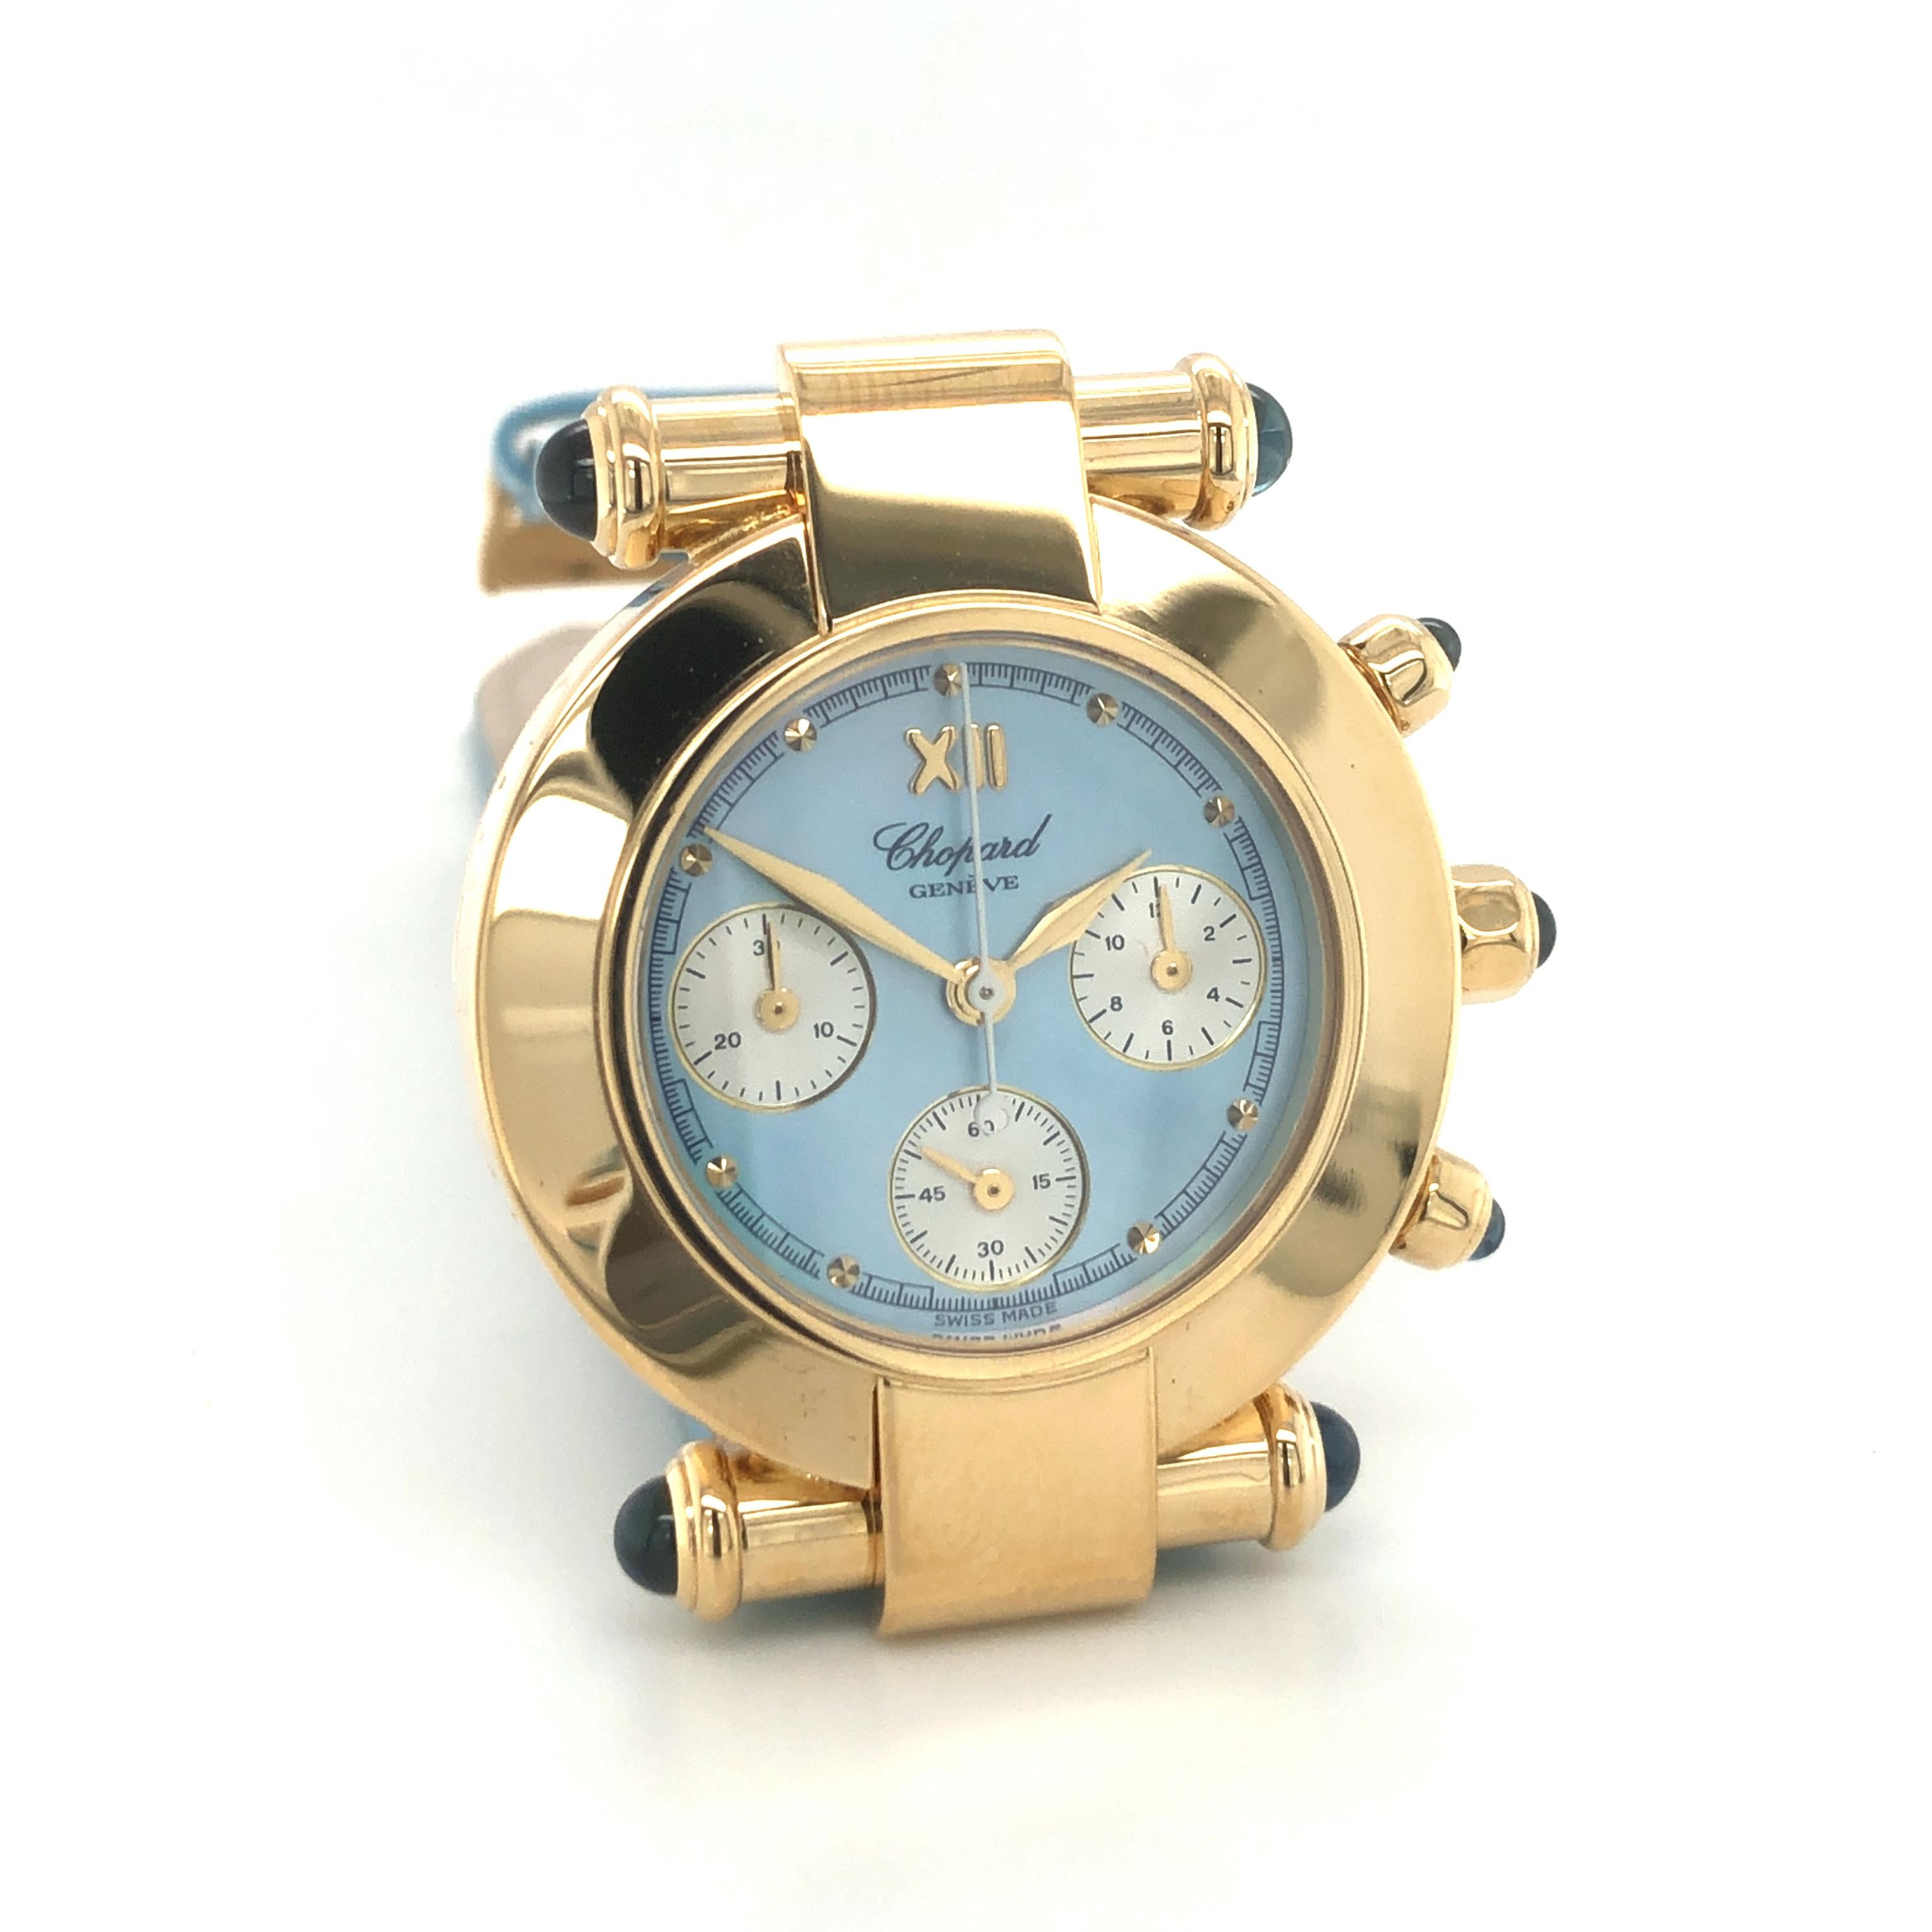 Attractive Chopard ladies watch in 18K yellow gold. Timeless Imperiale design with chronograph functions (seconds, minutes and hours indications). Lugs and pushers decorated with blue sapphire cabochons. 

Blue mother of pearl dial with golden